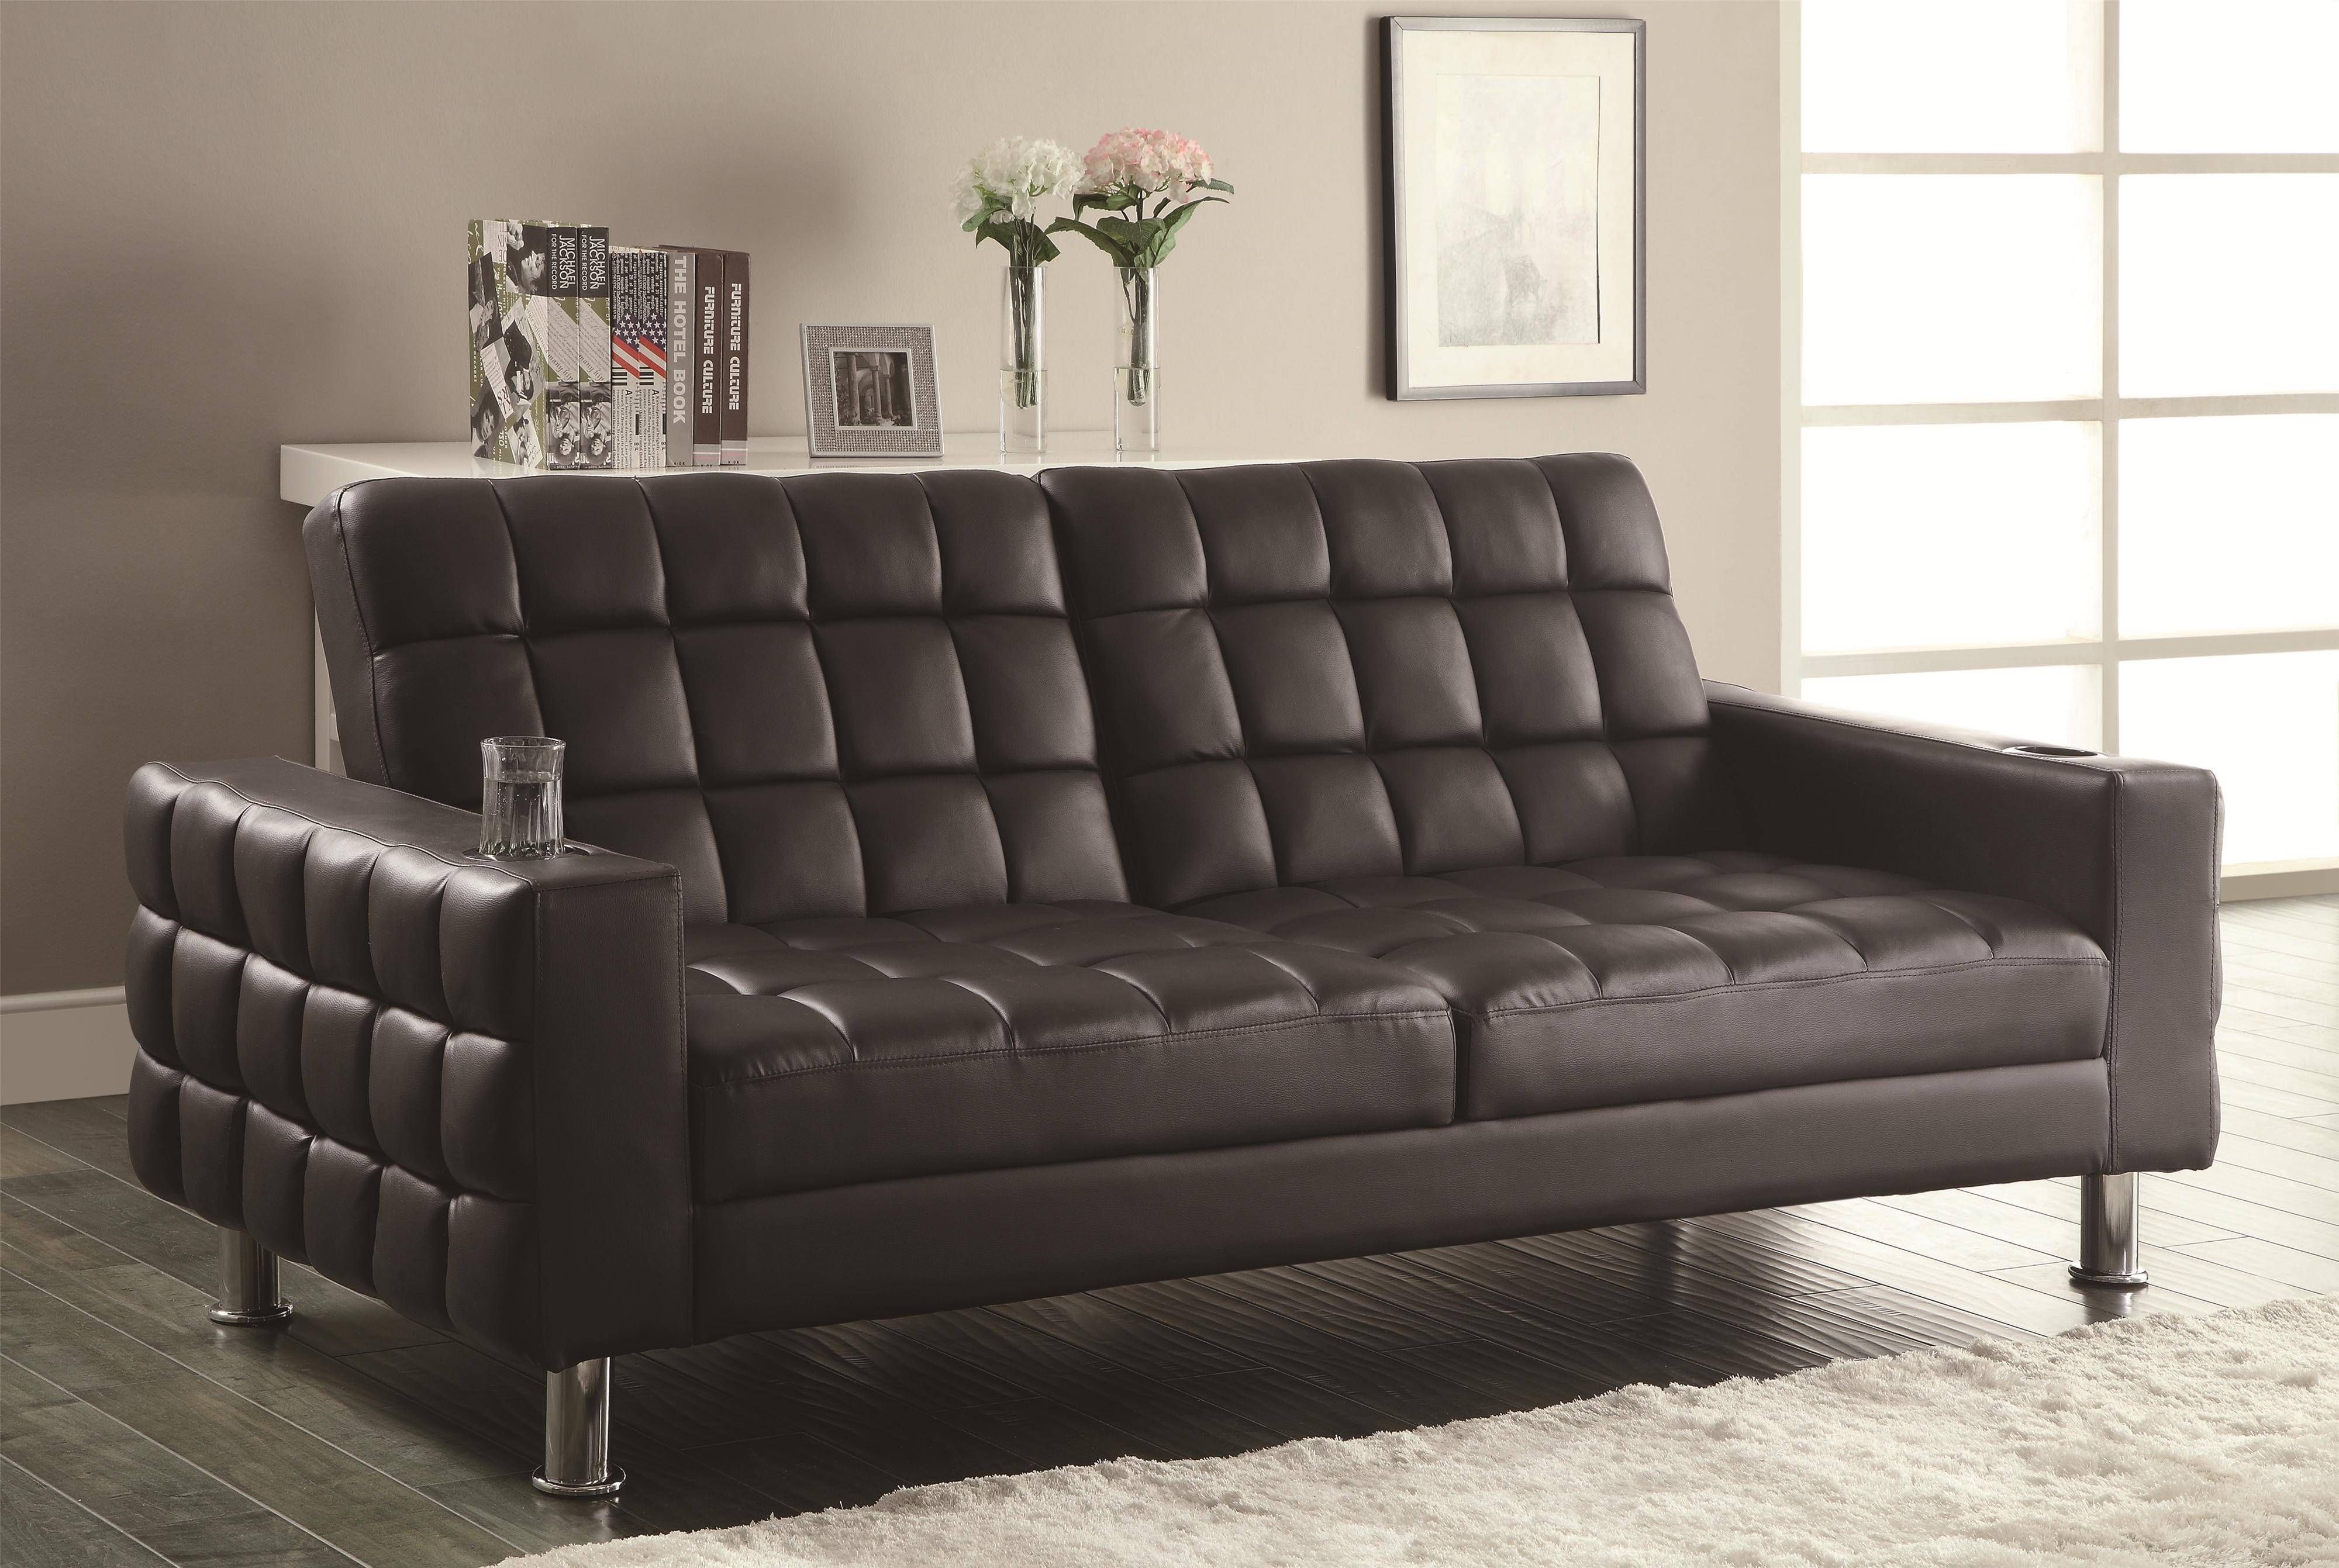 Coaster Sofa Beds And Futons Adjustable Sofa Bed With Cup Holders Regarding Coaster Futon Sofa Beds (View 9 of 15)